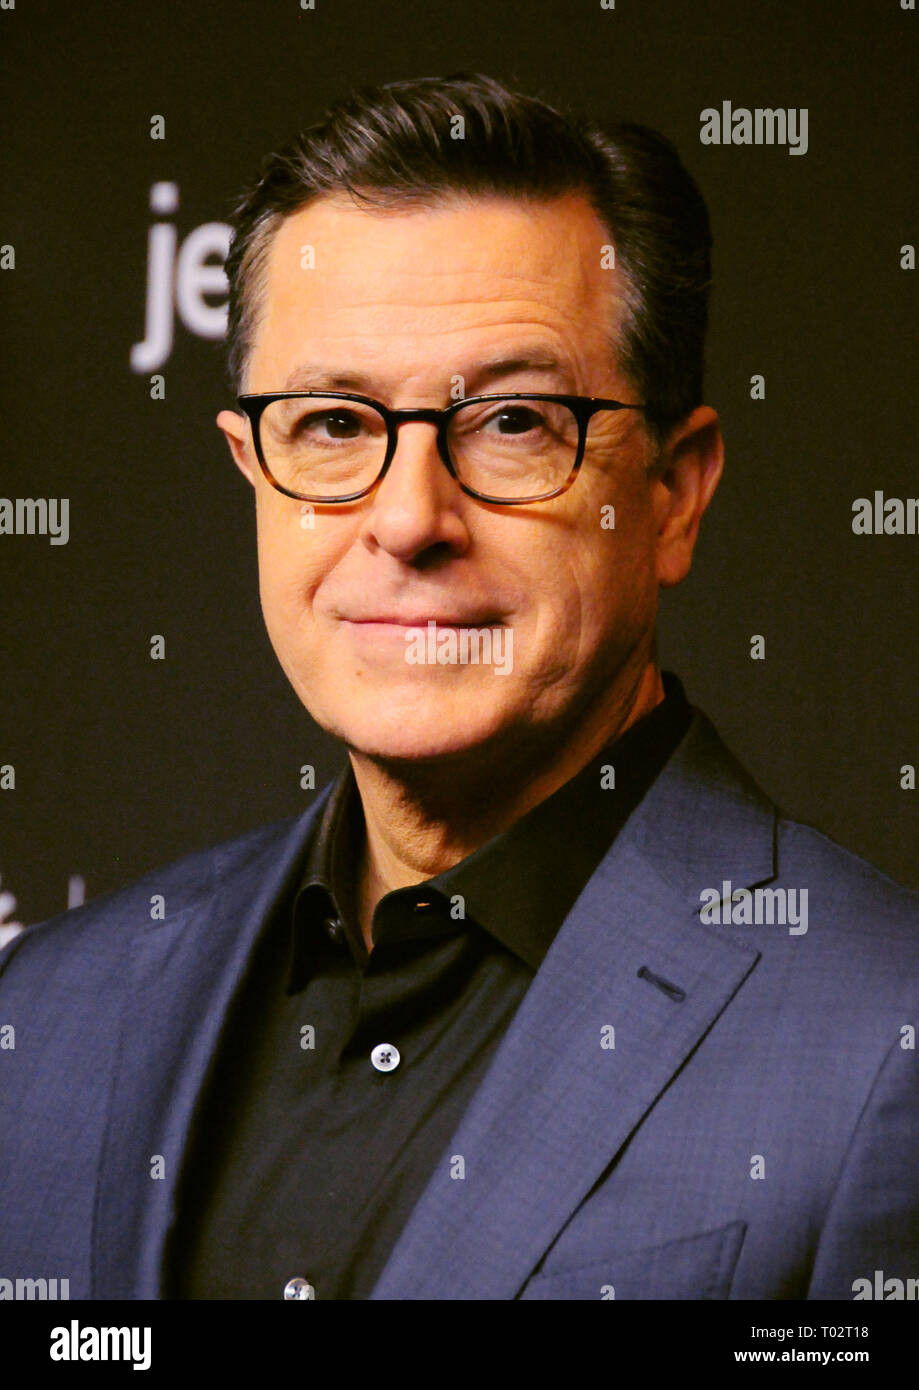 California, USA. 16th March 2019. Television personality Stephen Colbert attends 'An Evening with Stephen Colbert' at PaleyFest Los Angeles 2019 on March 16, 2019 at the Dolby Theatre in Hollywood, California. Photo by Barry King/Alamy Live News Stock Photo